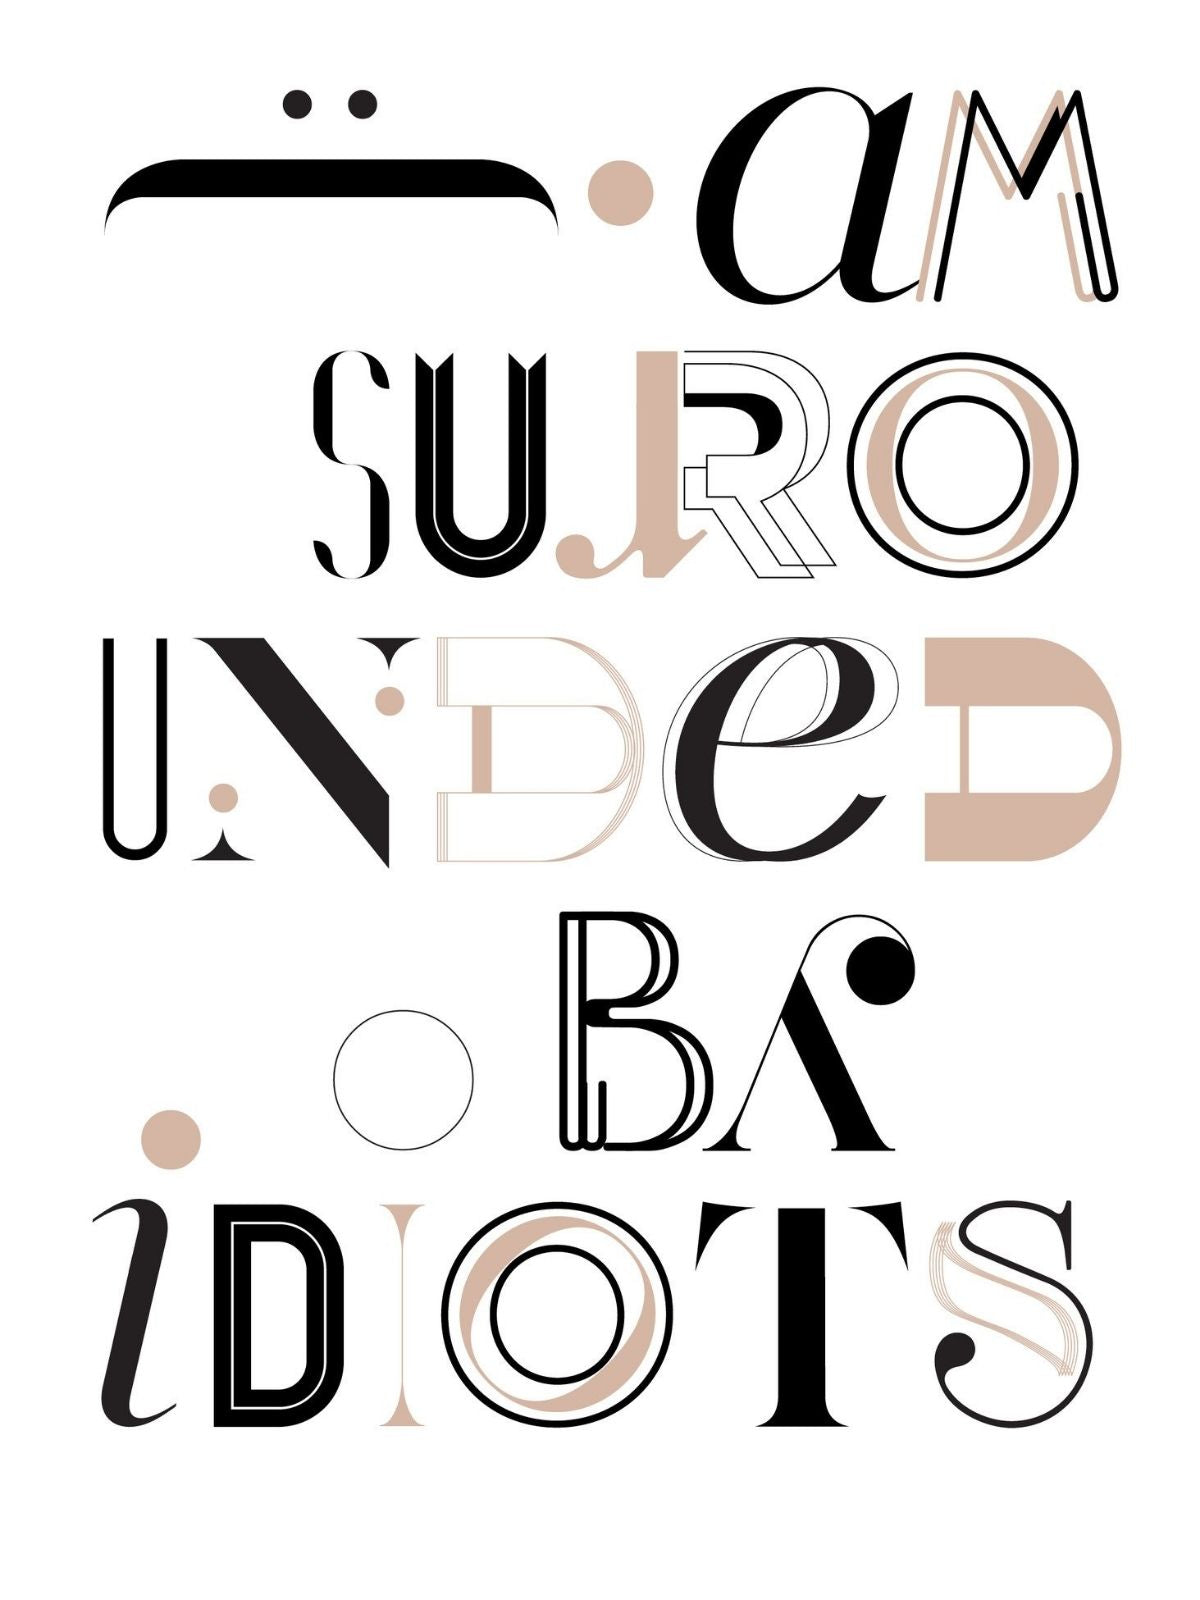 I AM SURROUNDED BY IDIOTS graphic - Marcell Puskás